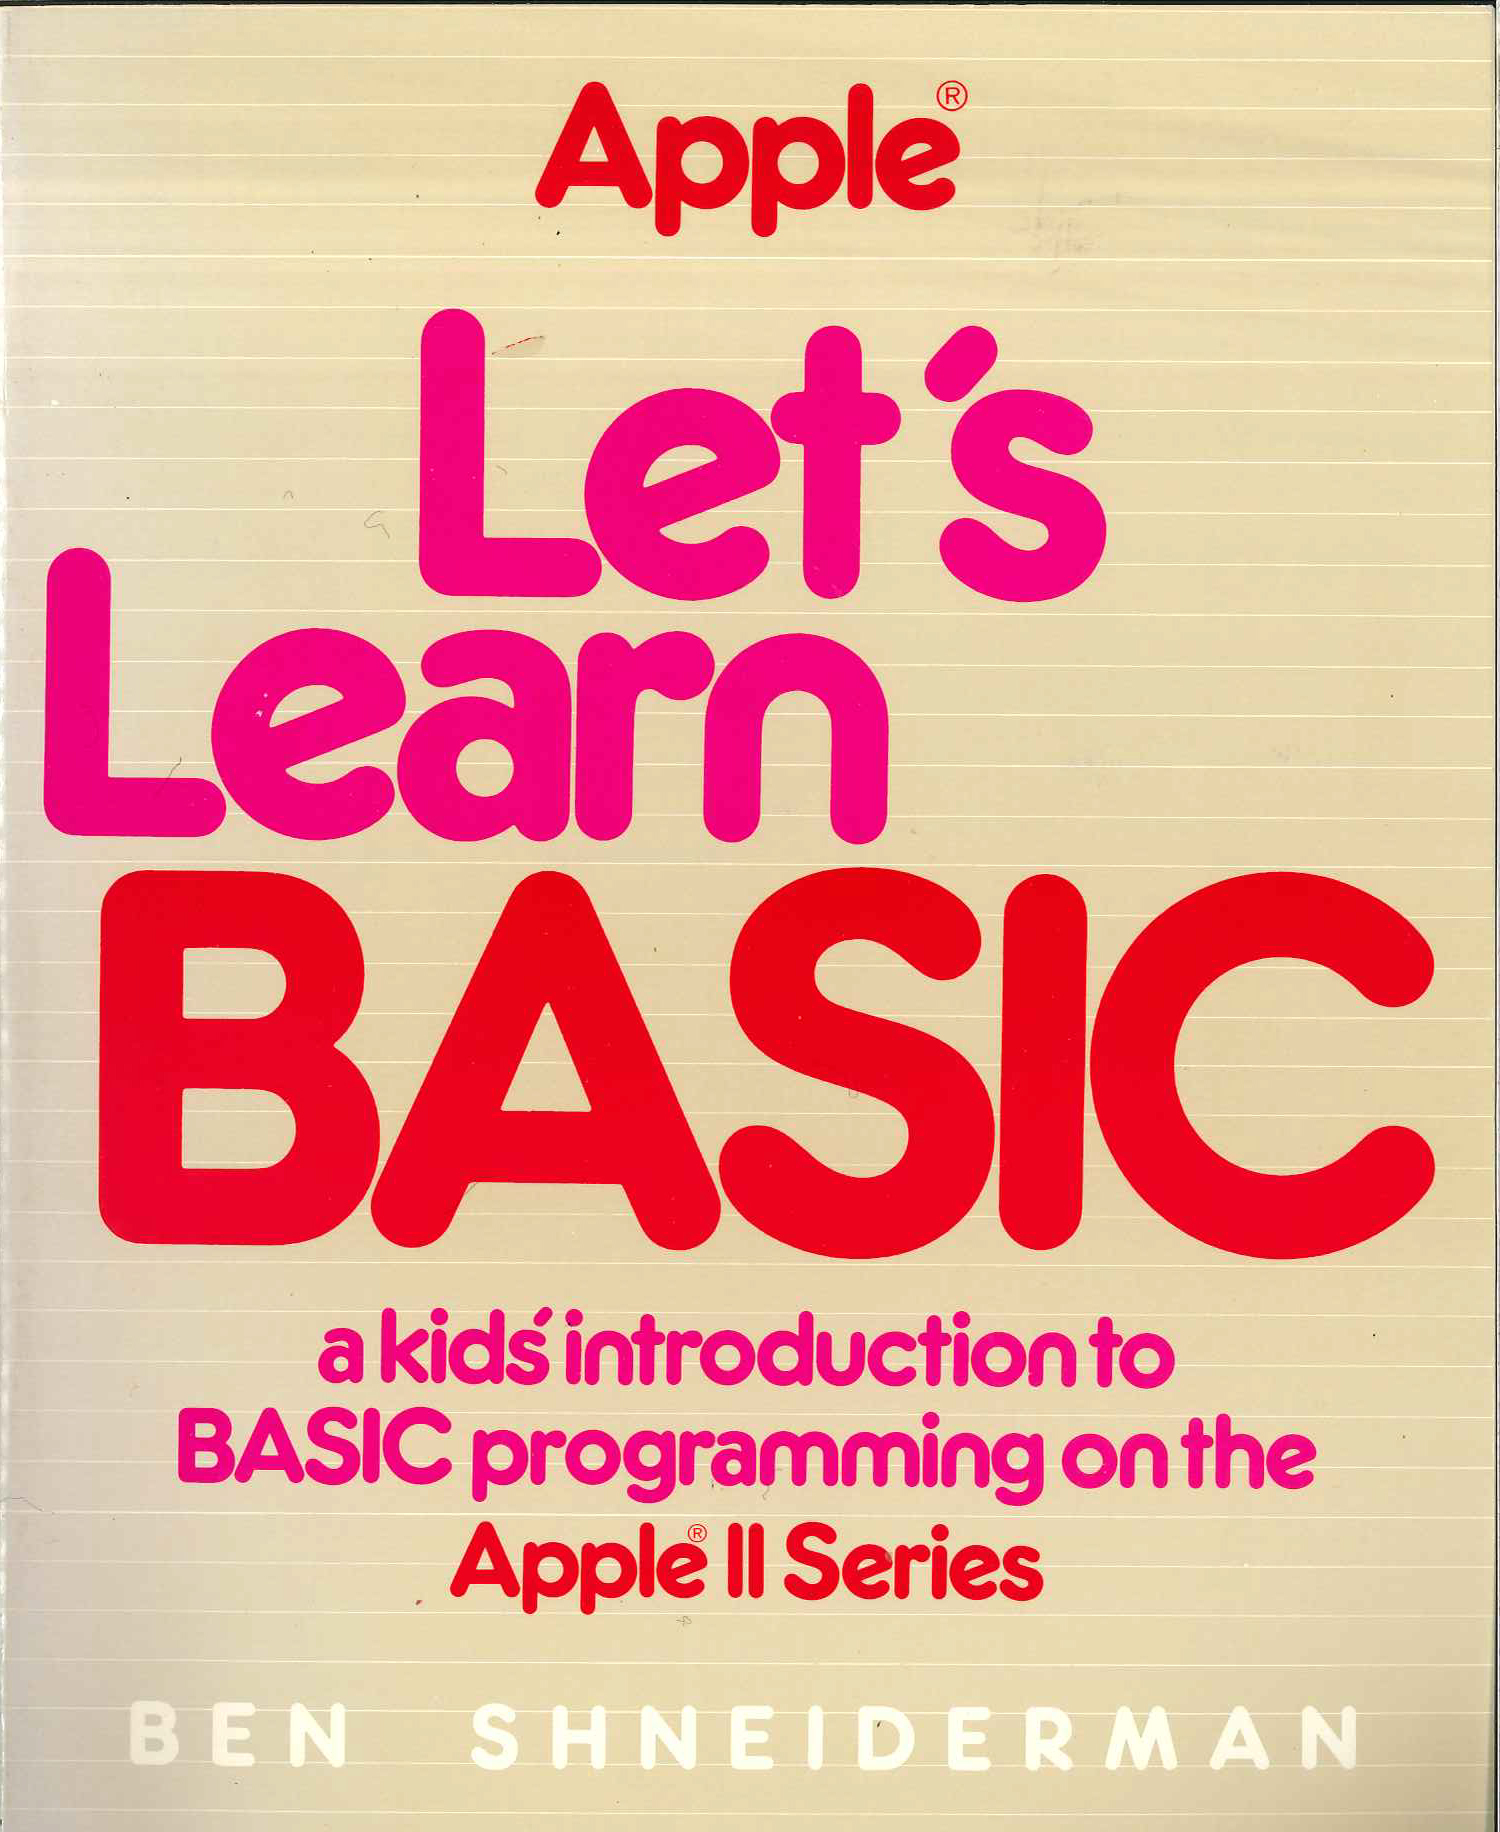 Let's Learn BASIC: A Kids' Introduction to BASIC Programming Apple